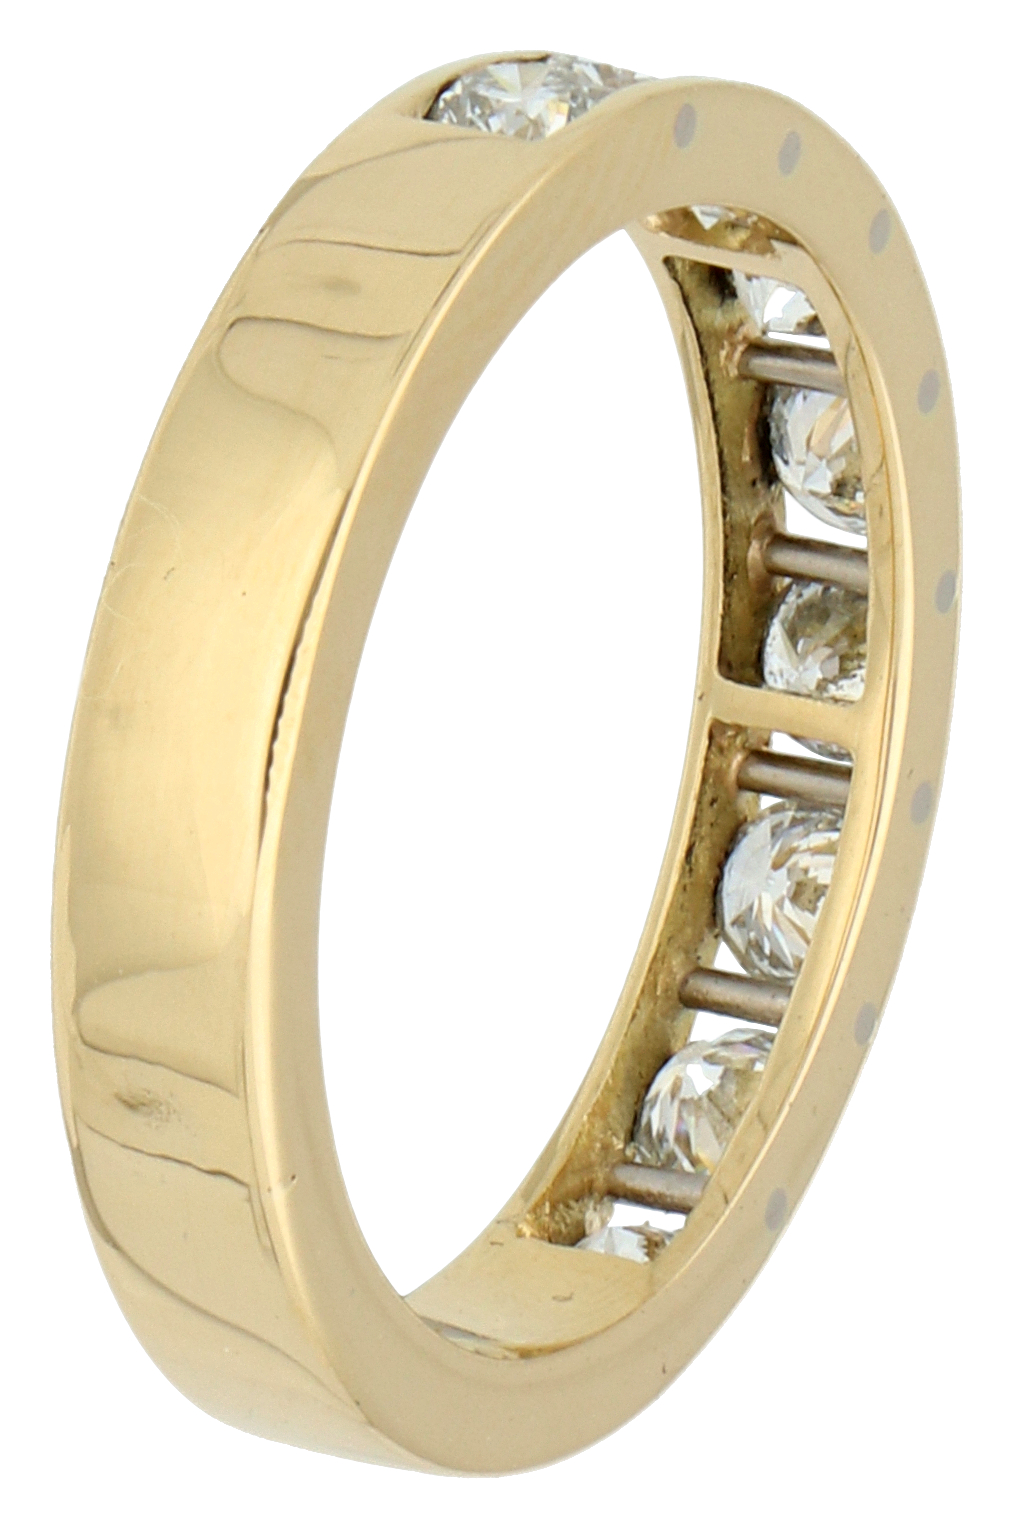 No Reserve - 18K Yellow gold demi-alliance ring set with approx. 0.81 ct. diamond. - Image 2 of 3